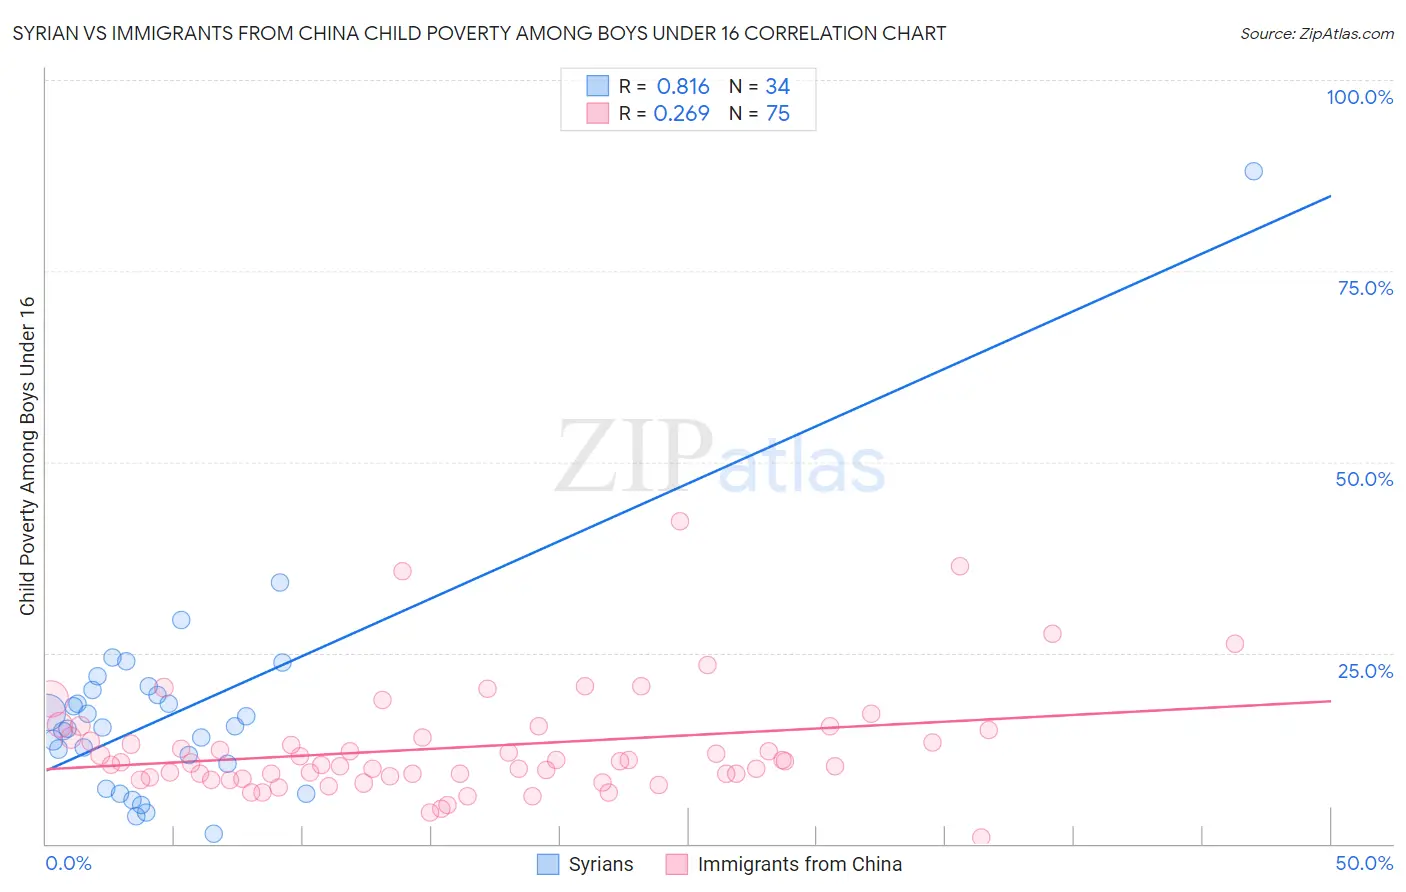 Syrian vs Immigrants from China Child Poverty Among Boys Under 16